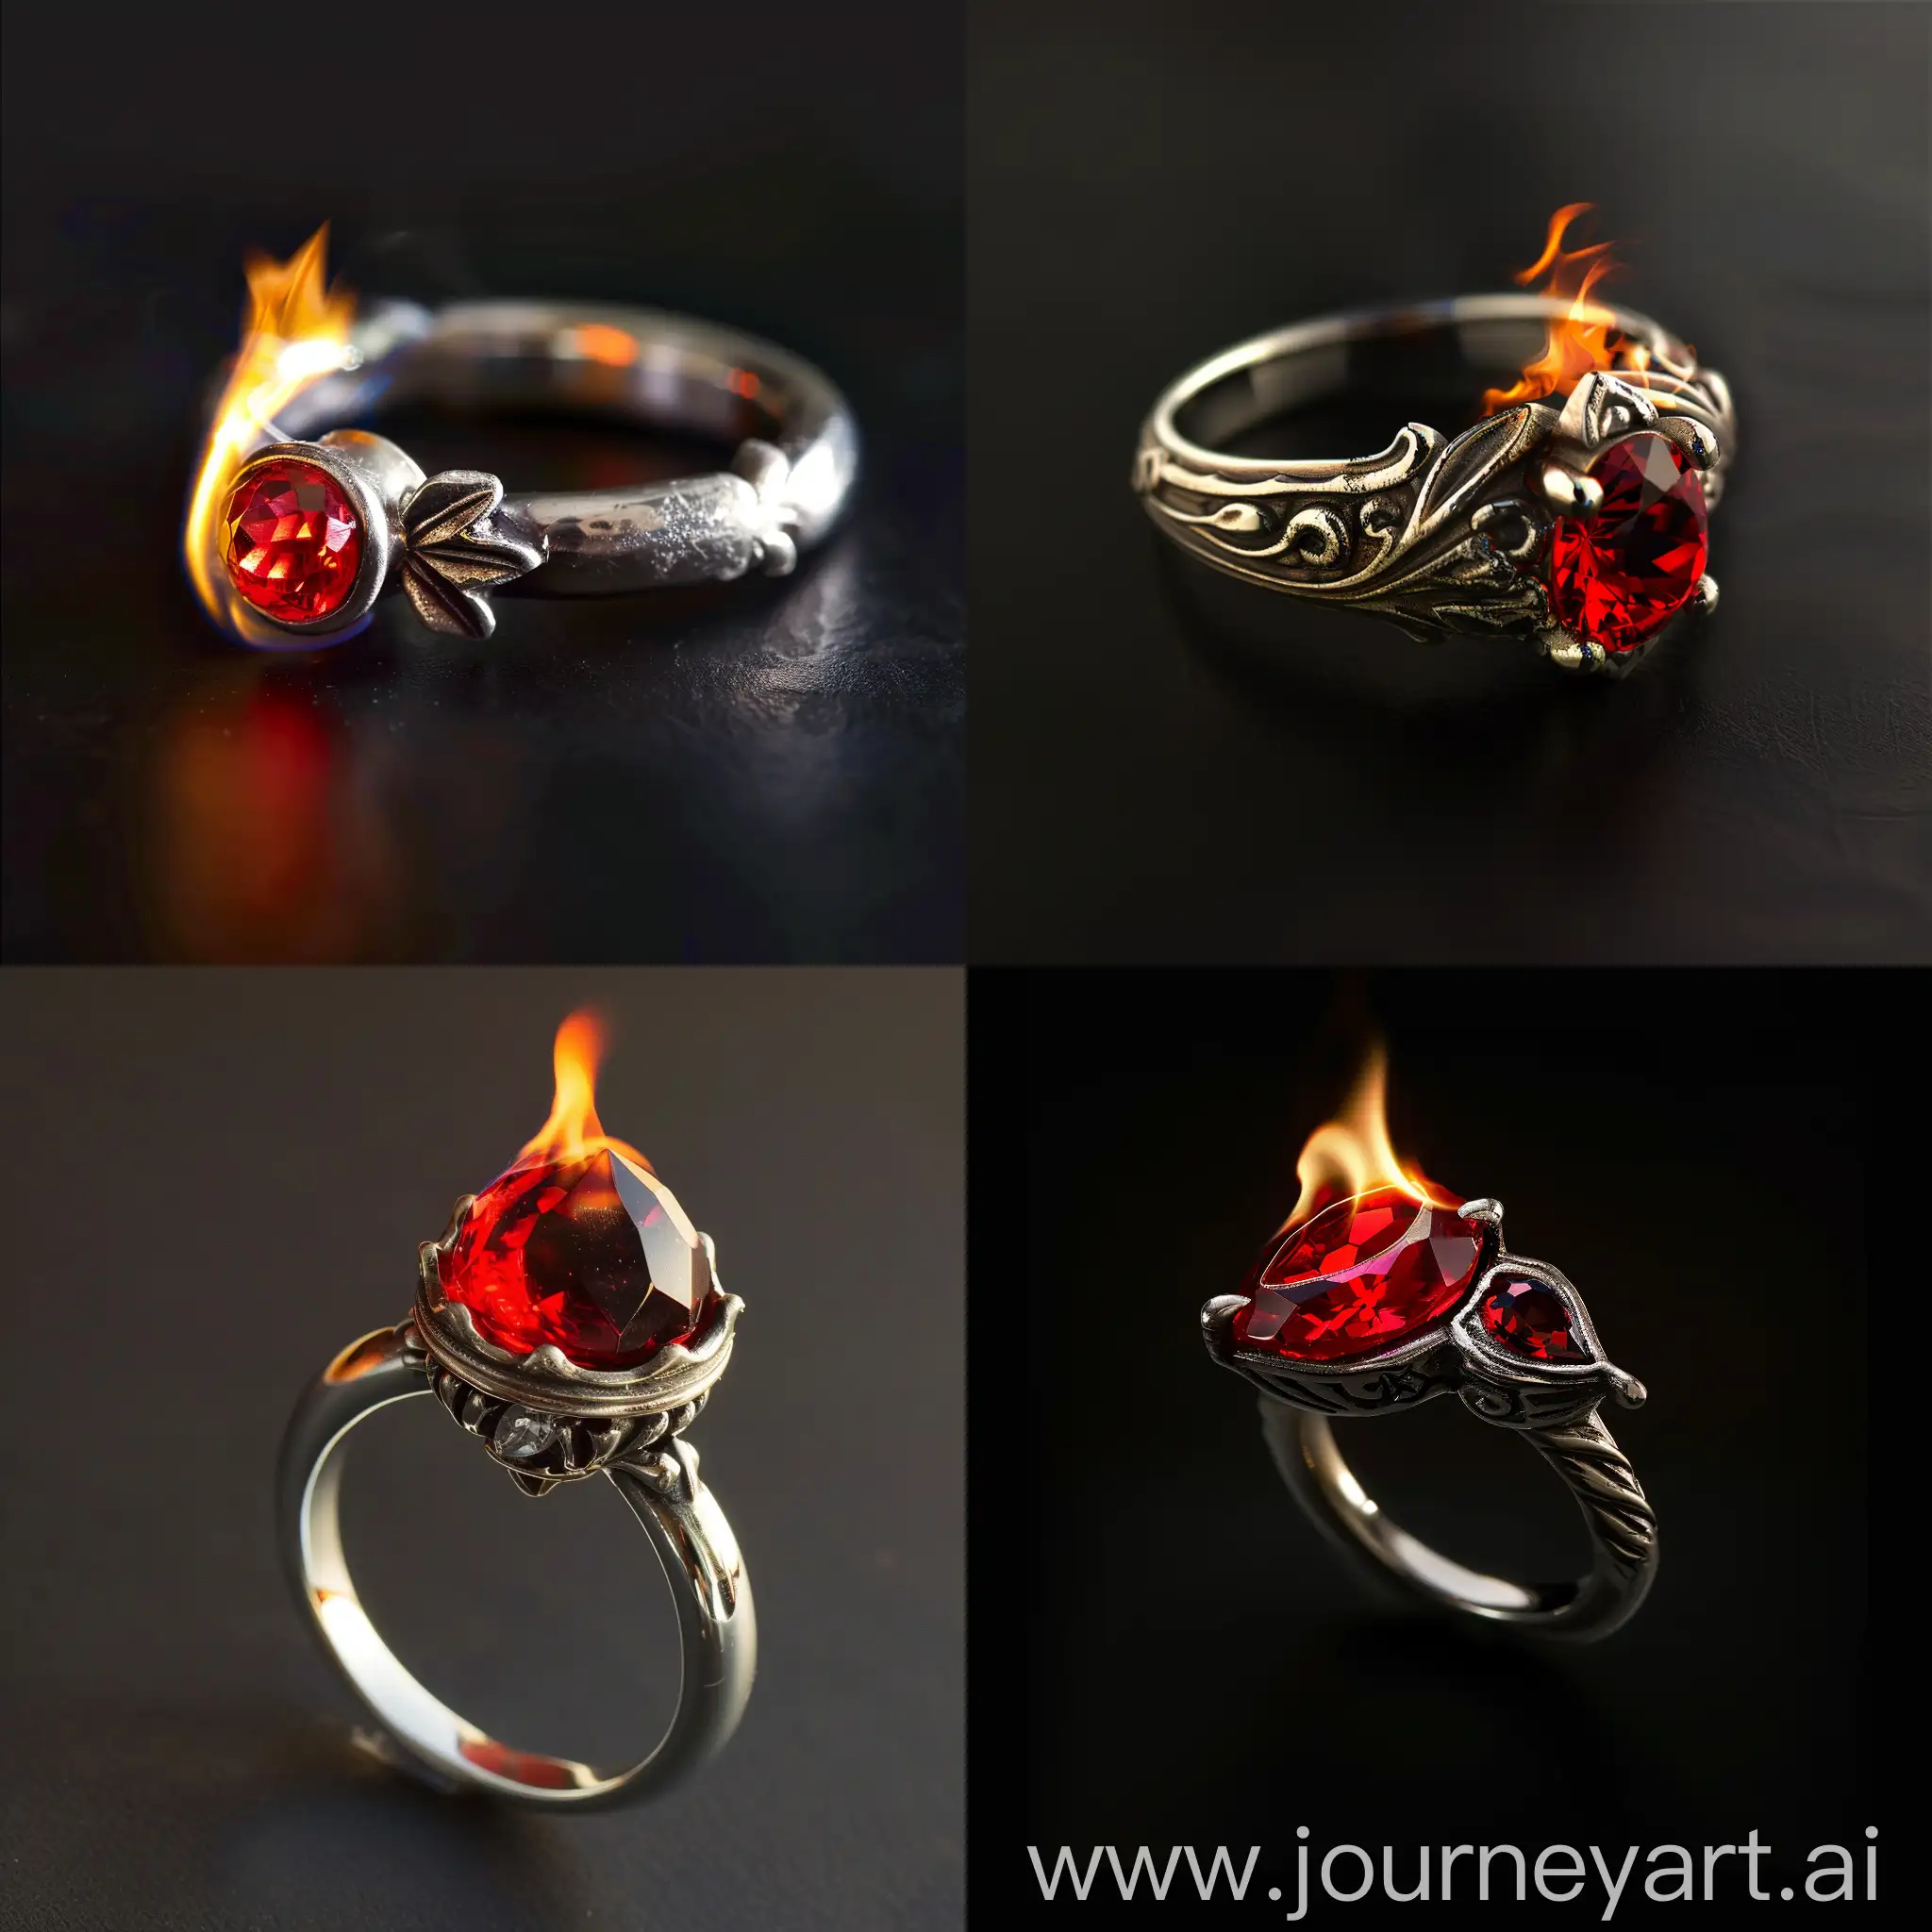 Enchanting-Fire-Emanates-from-a-Red-Stone-Ring